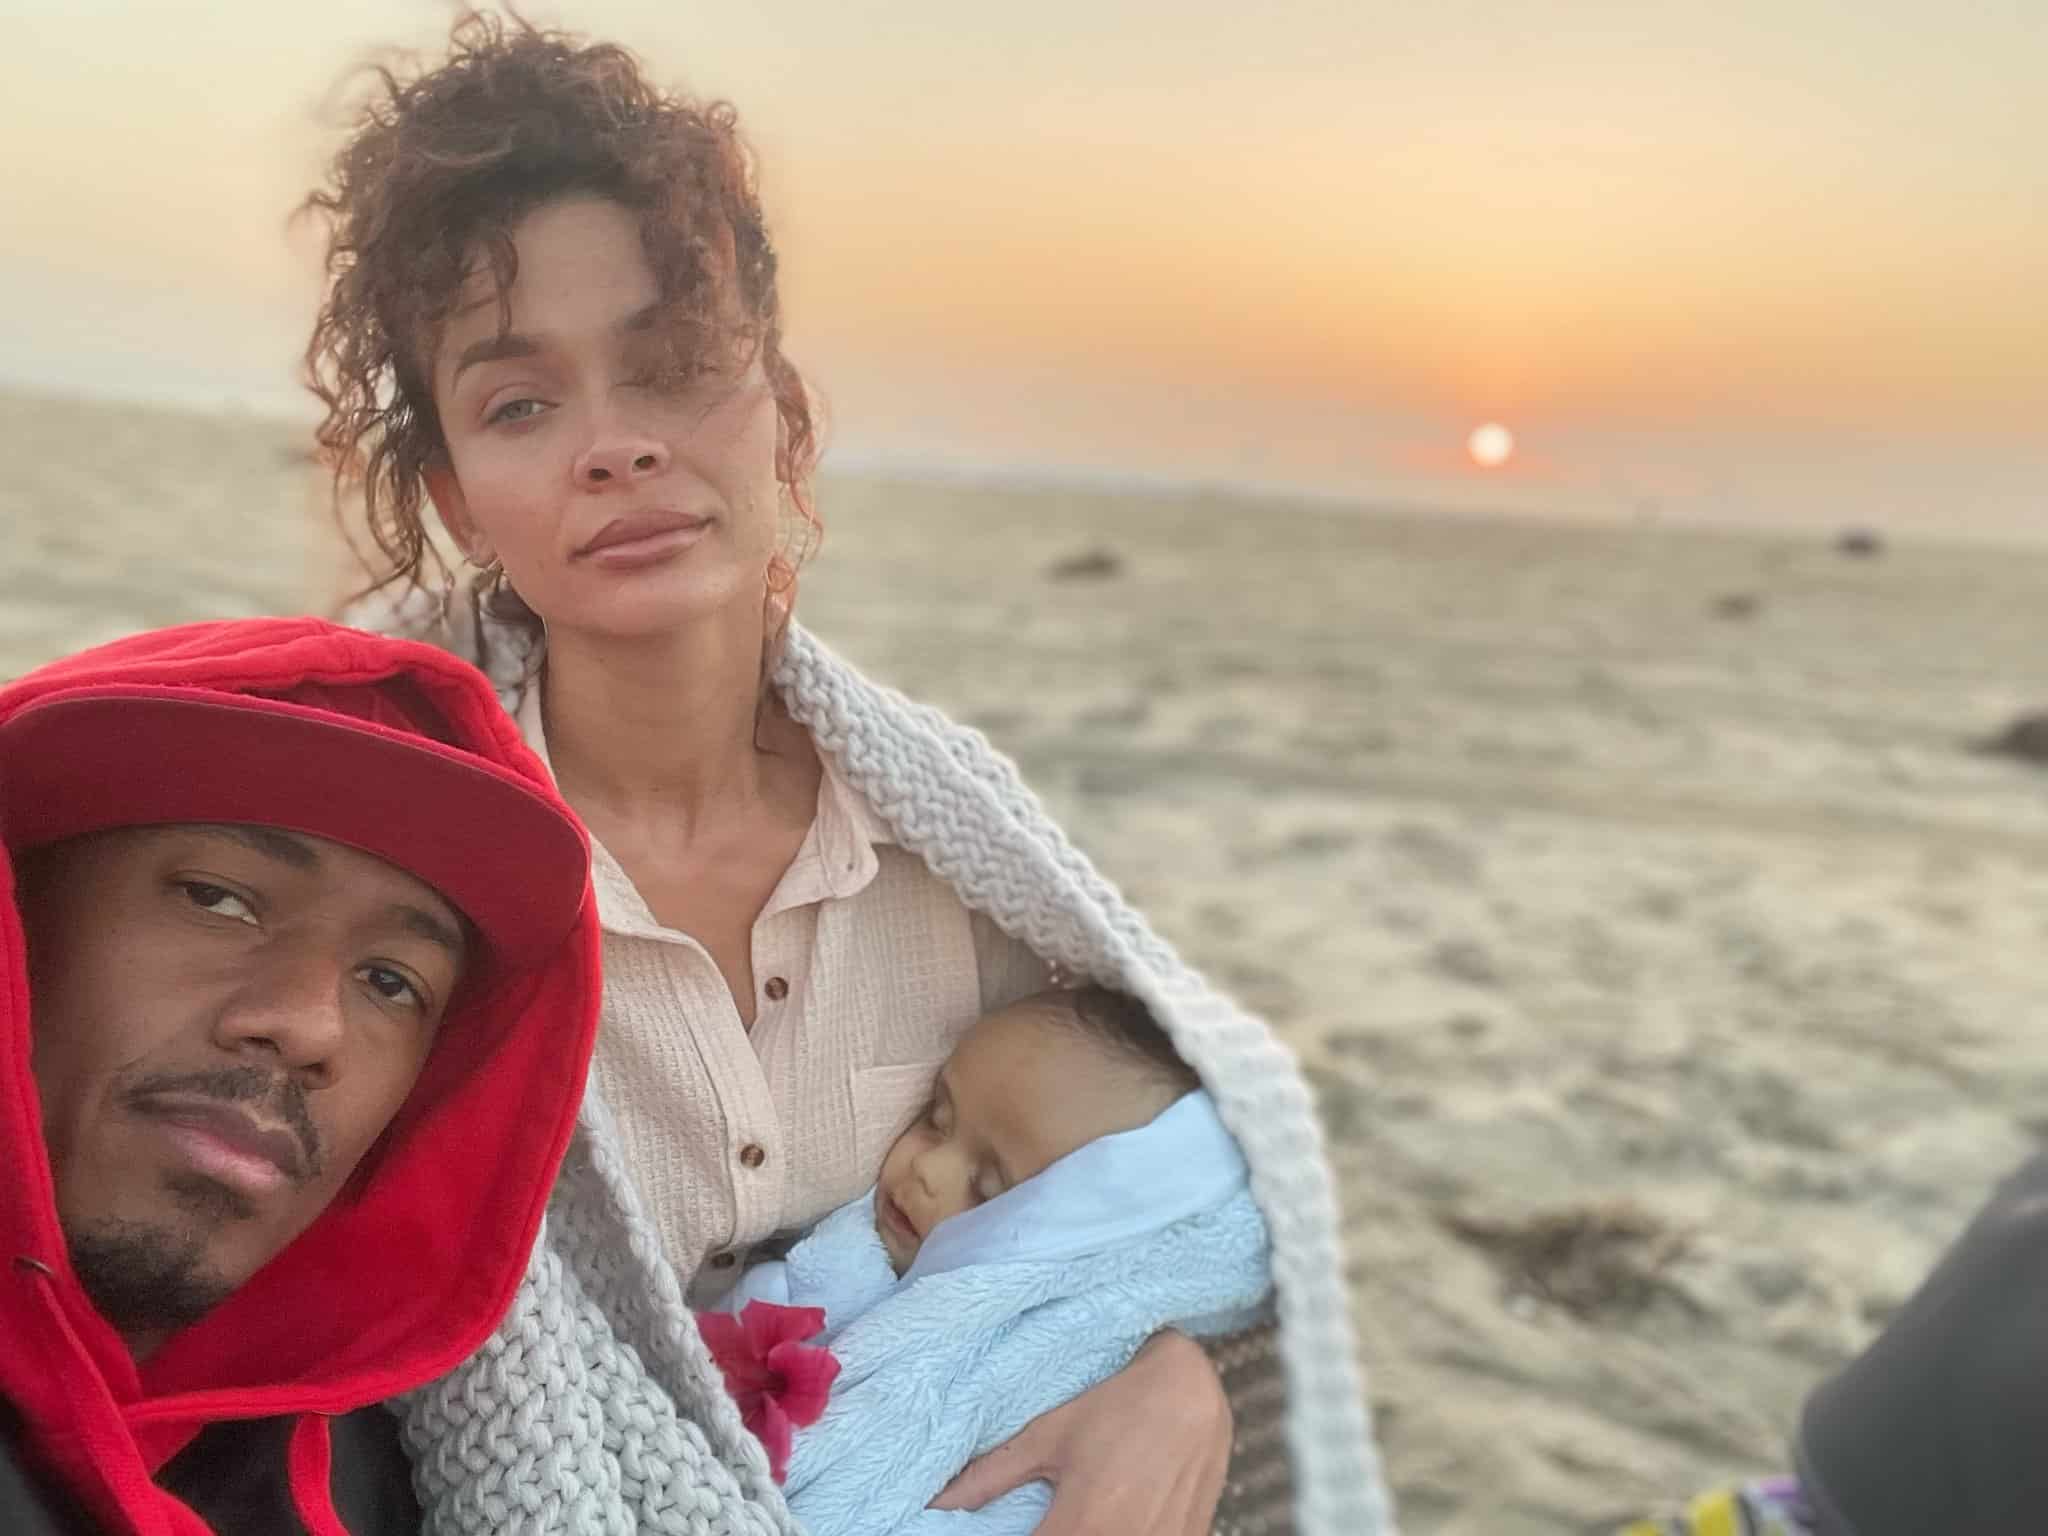 Nick Cannon shares that his 5-month-old son, Zen Cannon, died over the weekend after battling a form of brain cancer.